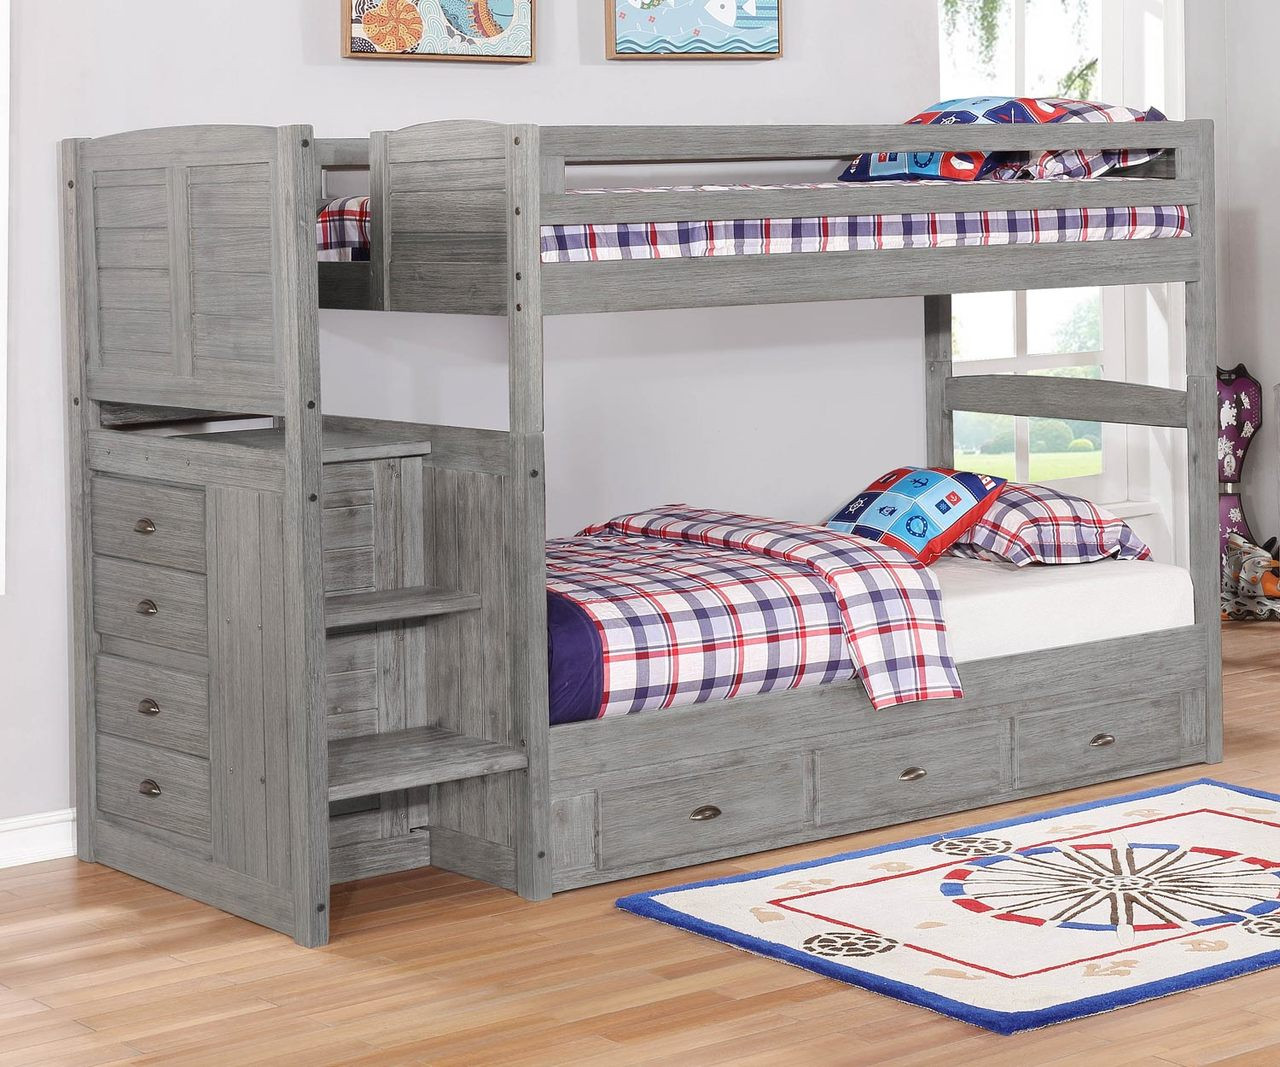  stair stepper bunk bed plans